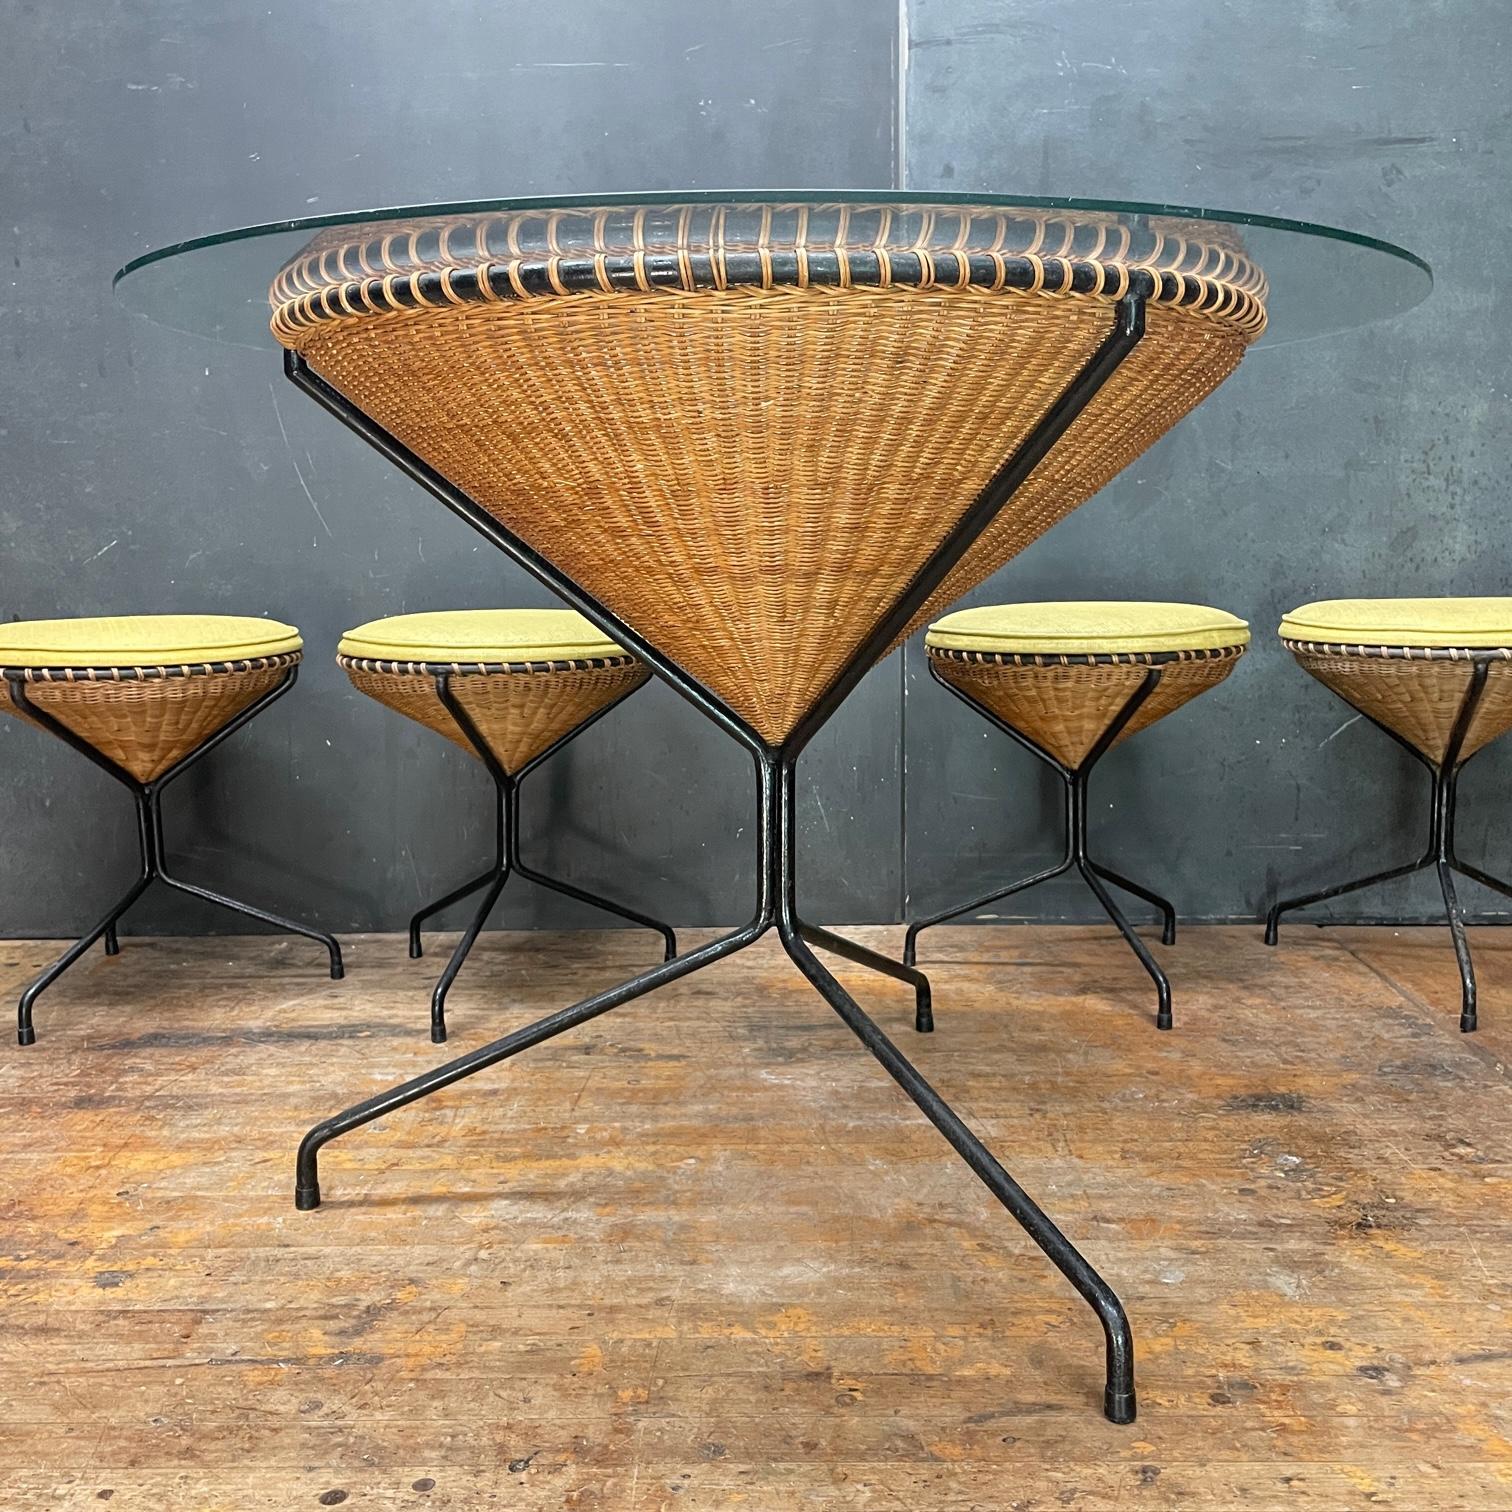 1950s California Design Danny Ho Fong Wicker Iron Tiki Dining Table Stool Set In Fair Condition For Sale In Hyattsville, MD